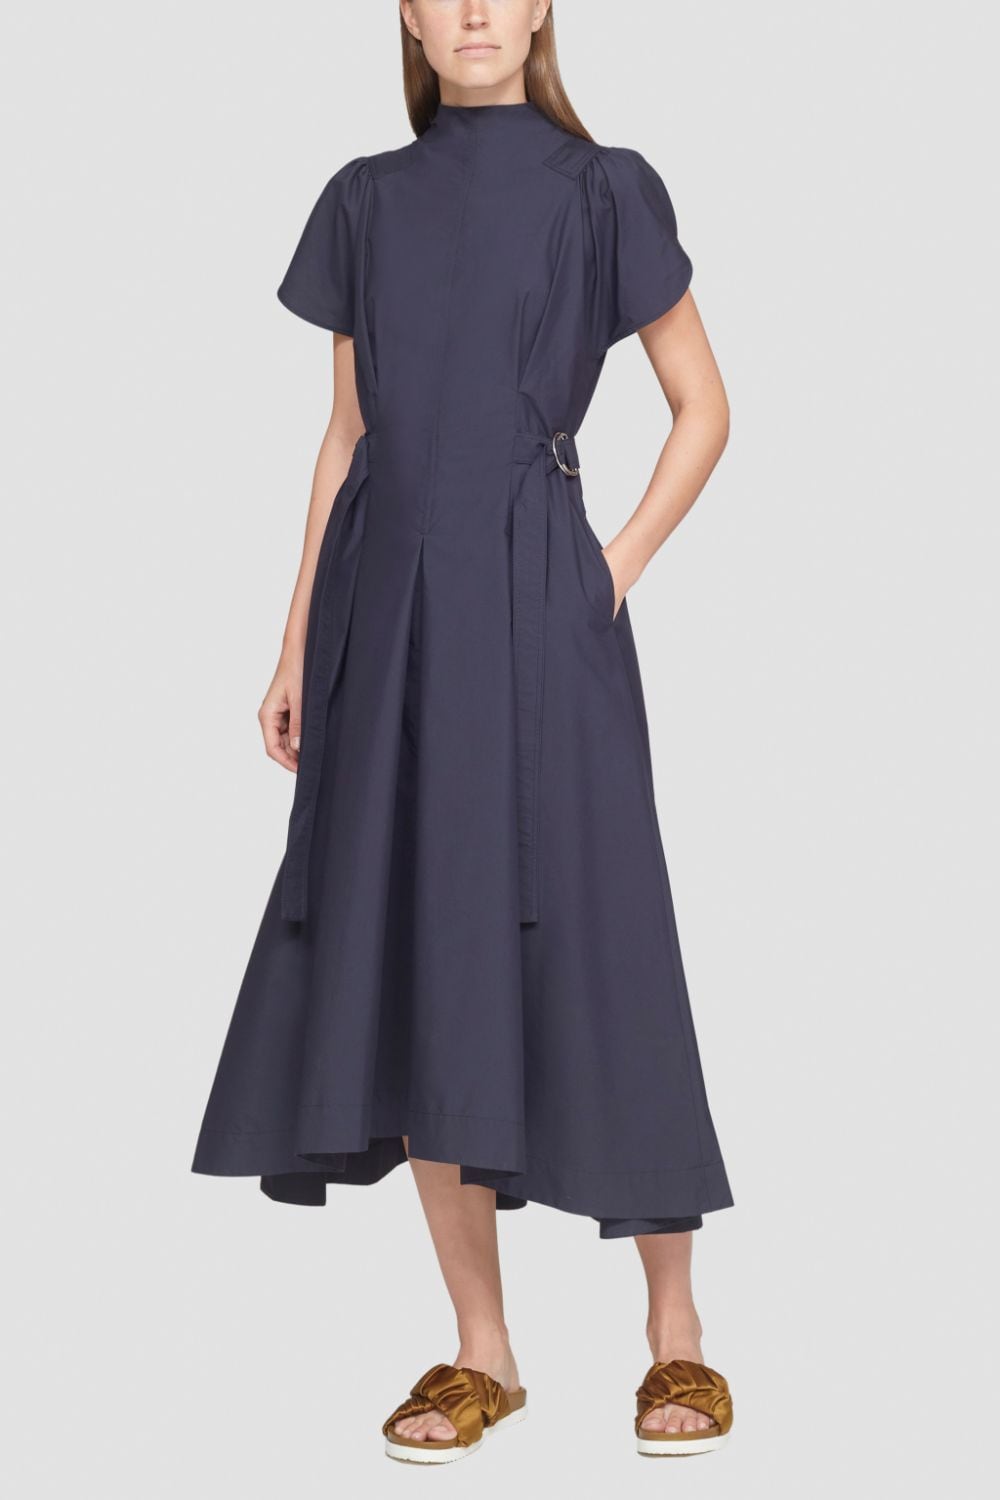 Tulip Puff Sleeve Dress in blue | 3.1 Phillip Lim Official Site